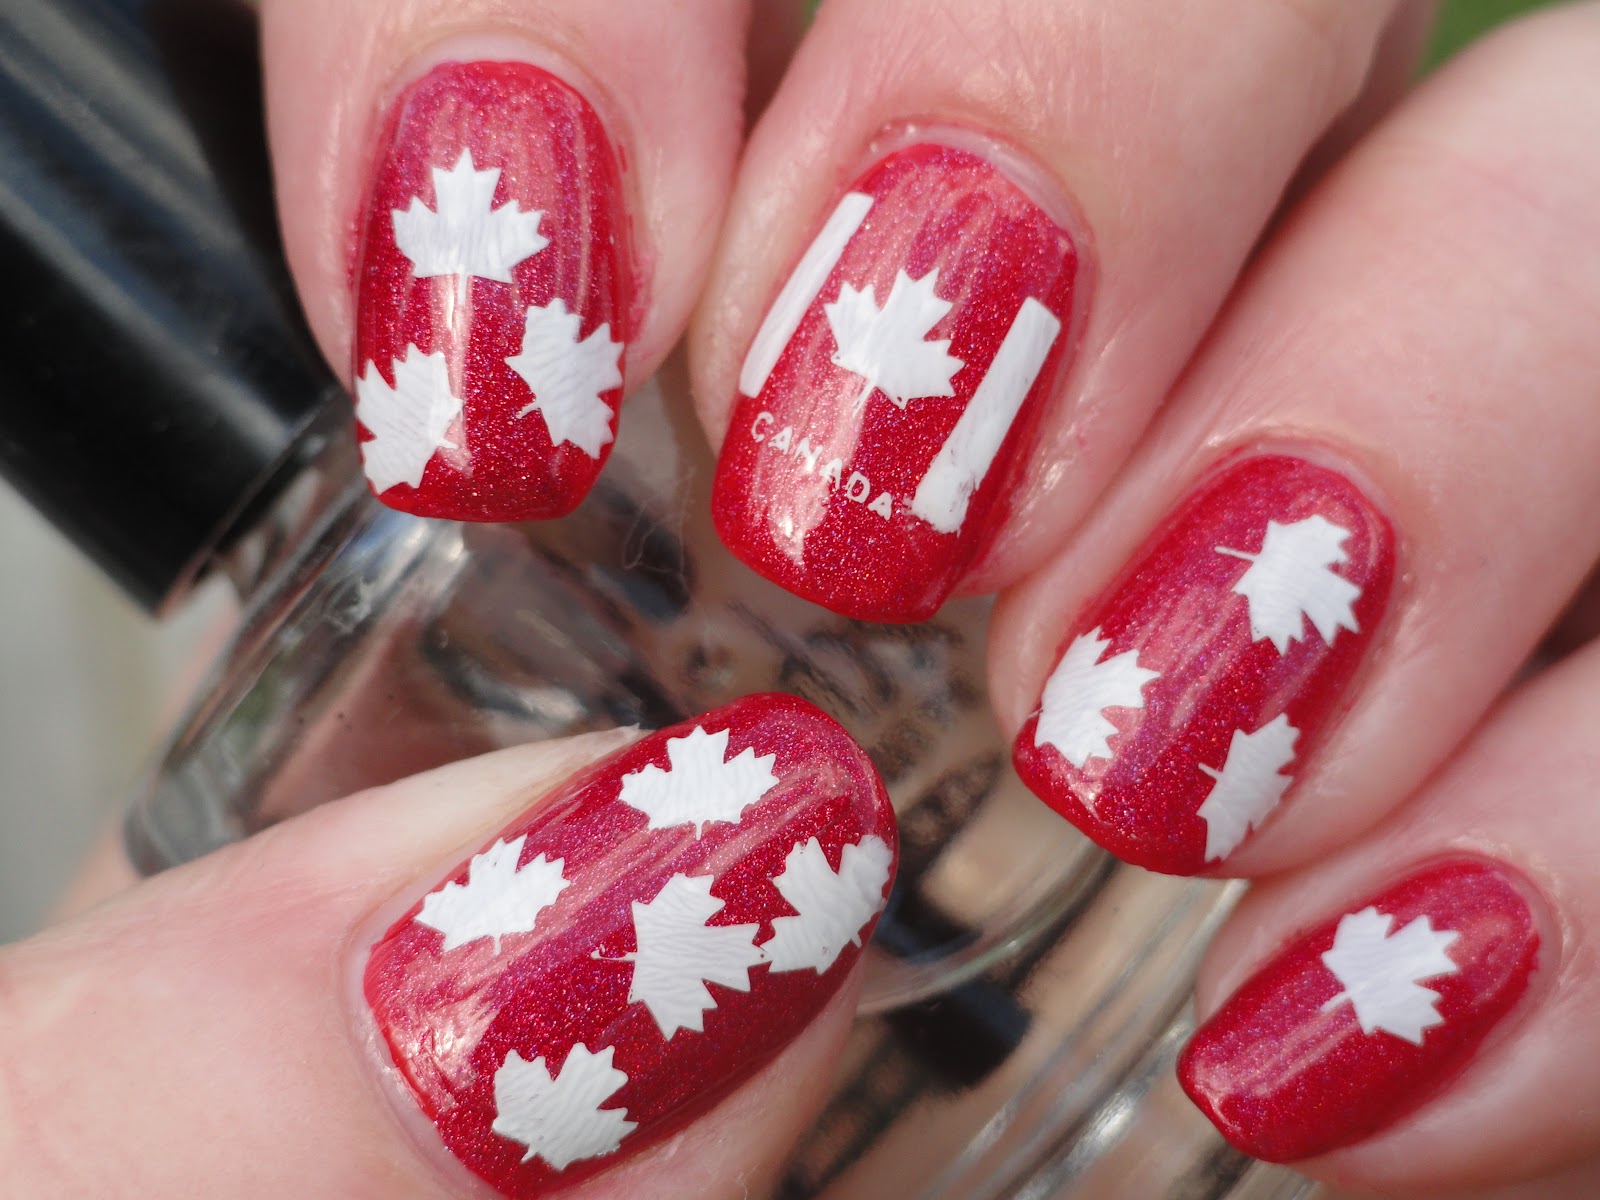 "Nail'd It! Canada!" - wide 4